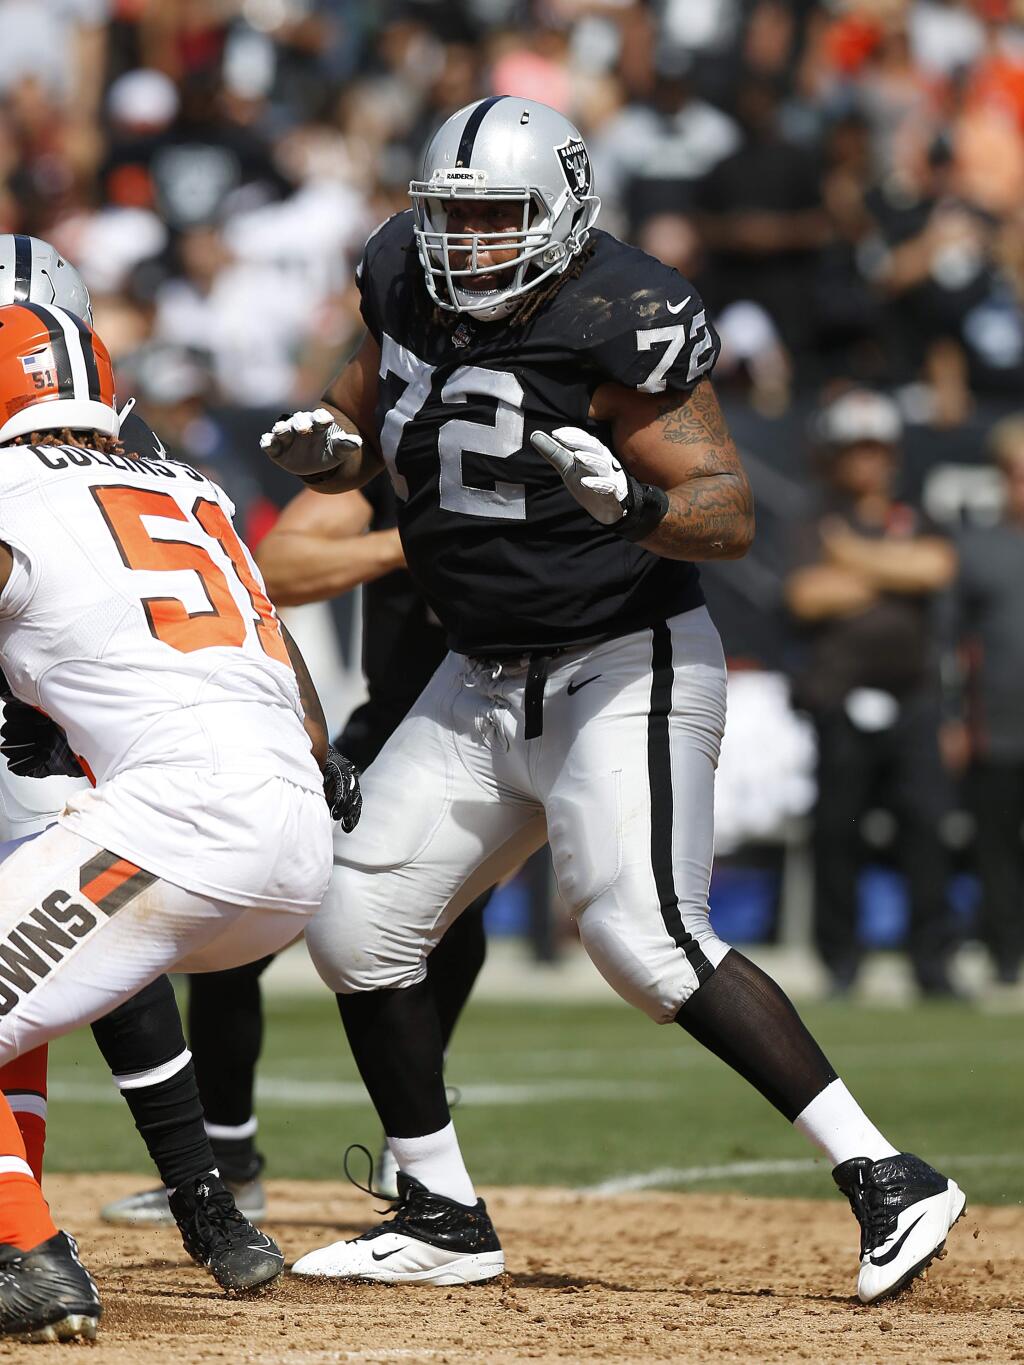 Oakland Raiders tackle Donald Penn against the Cleveland Browns during a game in Oakland, Sunday, Sept. 30, 2018. (AP Photo/D. Ross Cameron)